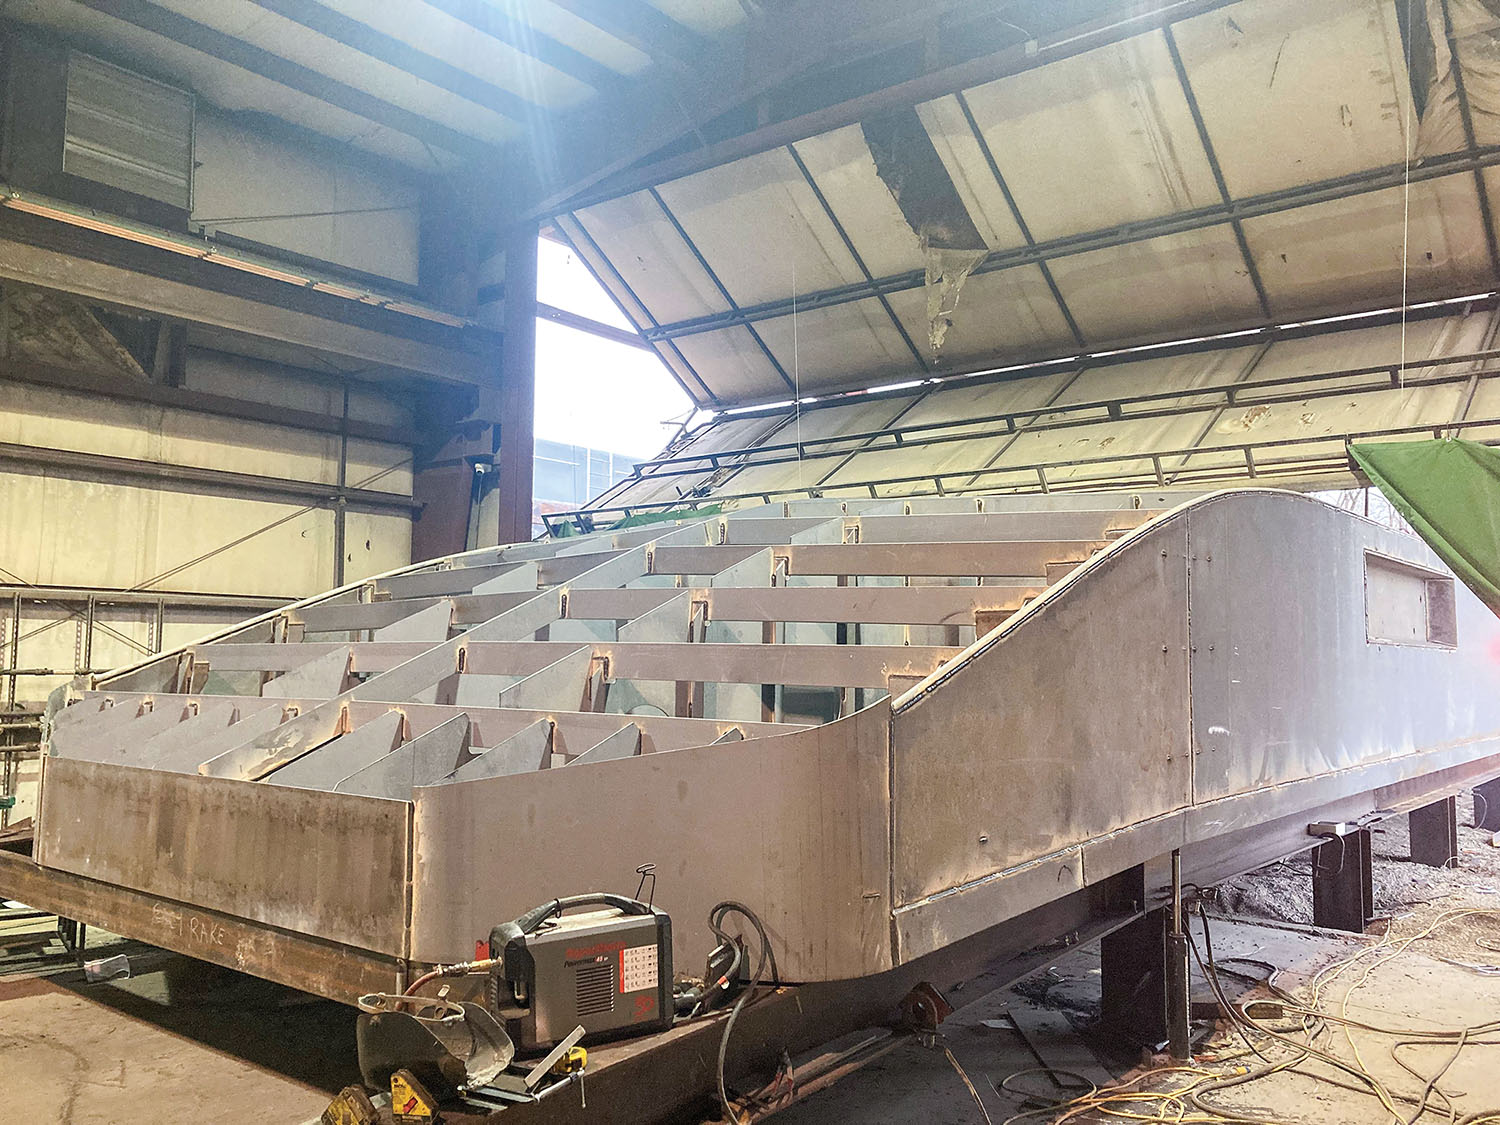 The hull for a boat that will be used for a ferry on the Tennessee River is under construction in the fabrication shop at Sheridan Shipyard, South Point, Ohio. (Photo courtesy of McGinnis Inc.)